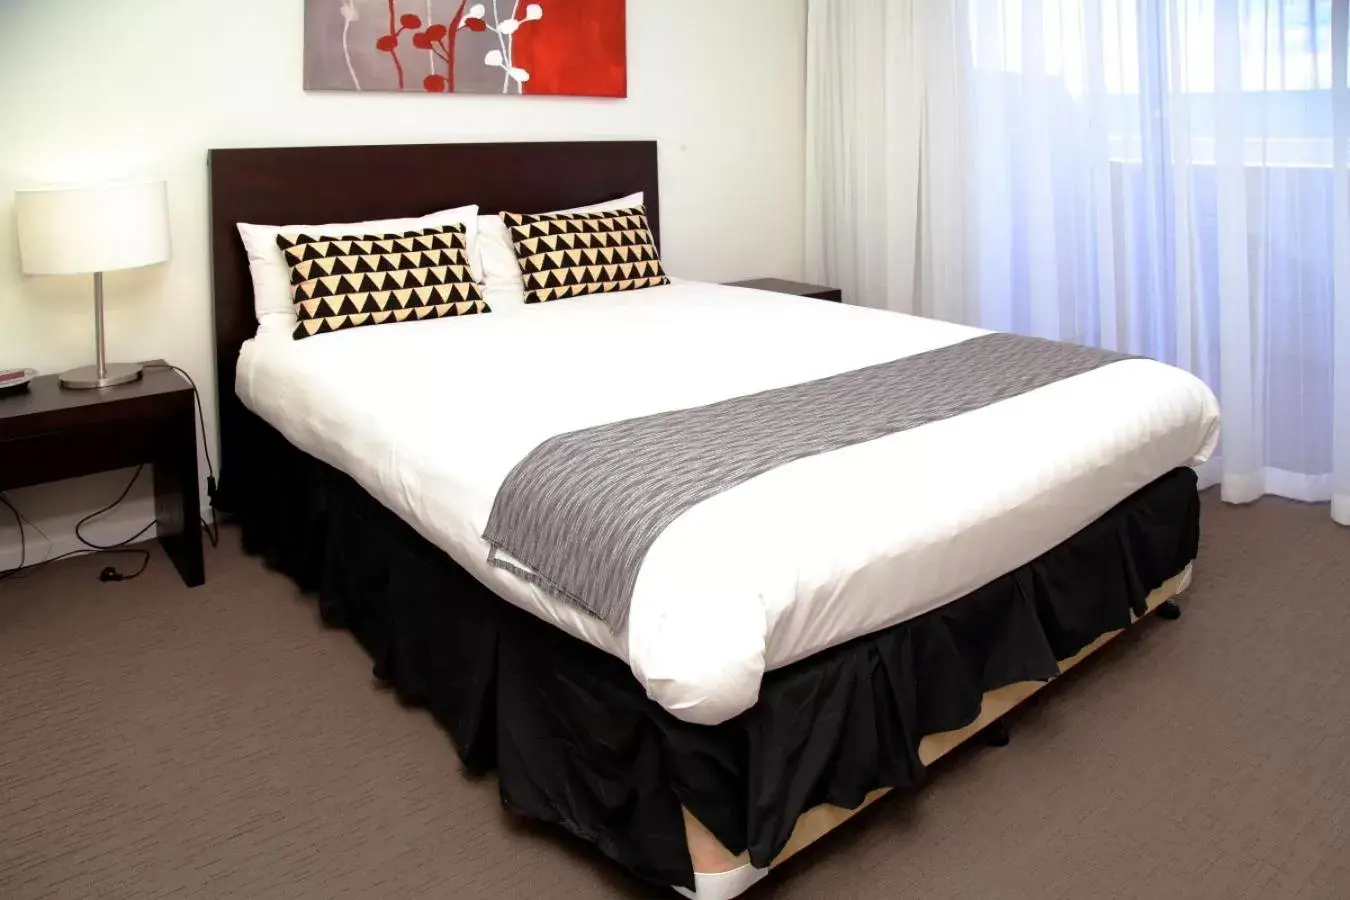 Bed in Toowoomba Central Plaza Apartment Hotel